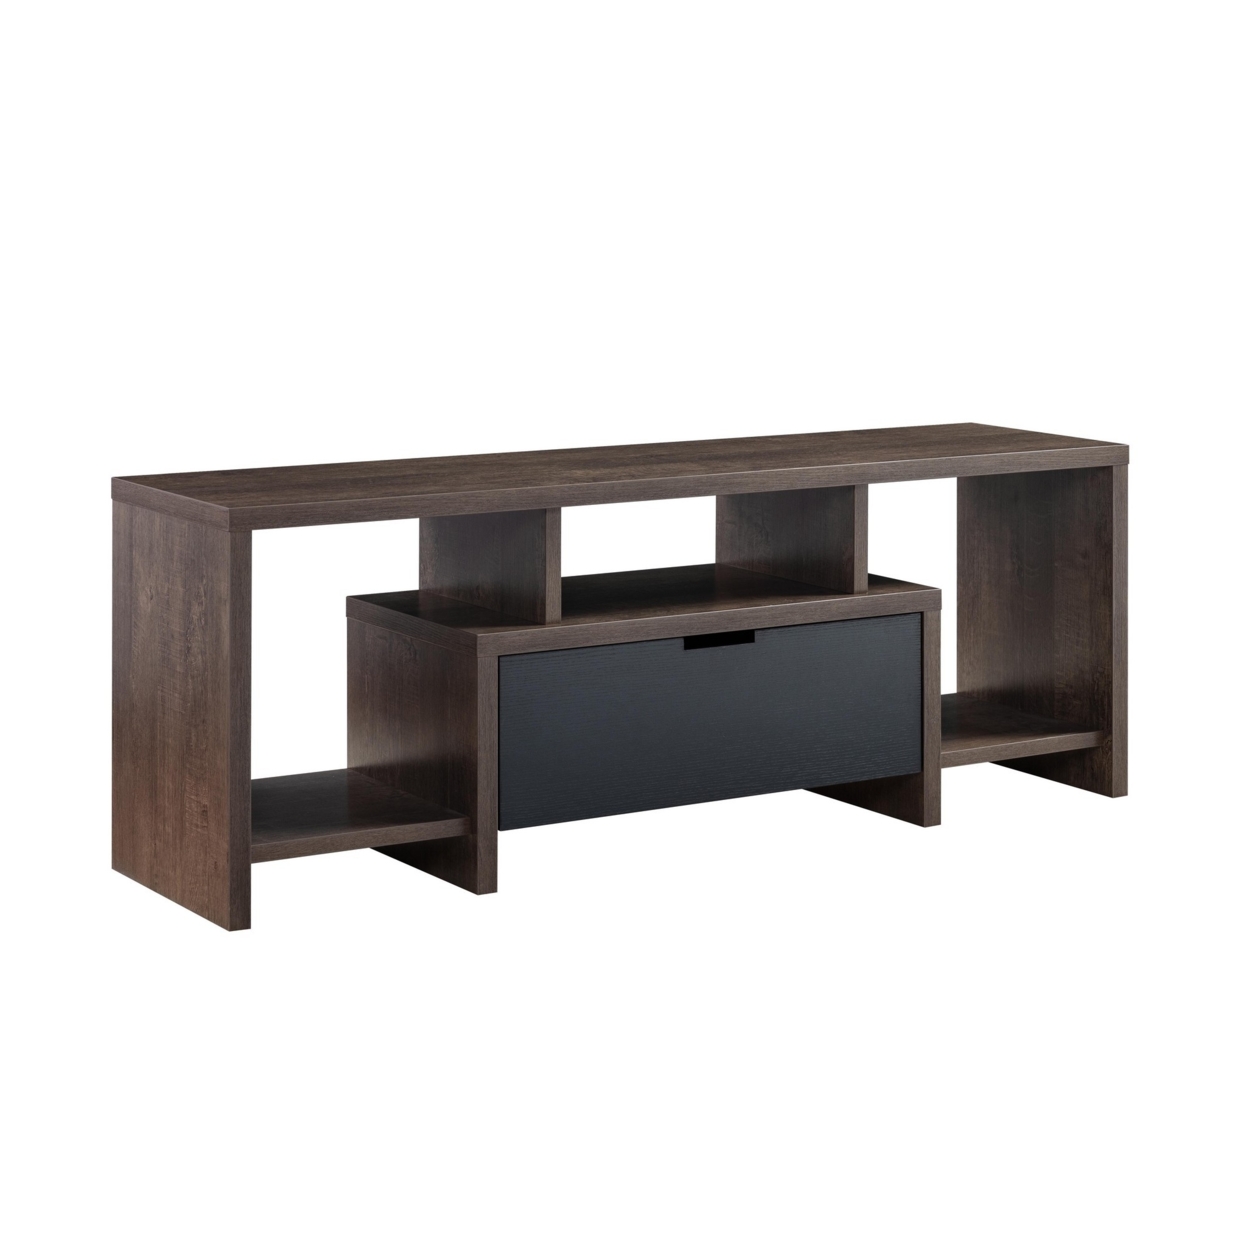 Elle 60 Inch TV Media Entertainment Console, 3 Compartments, Drawer, Walnut - image 1 of 5